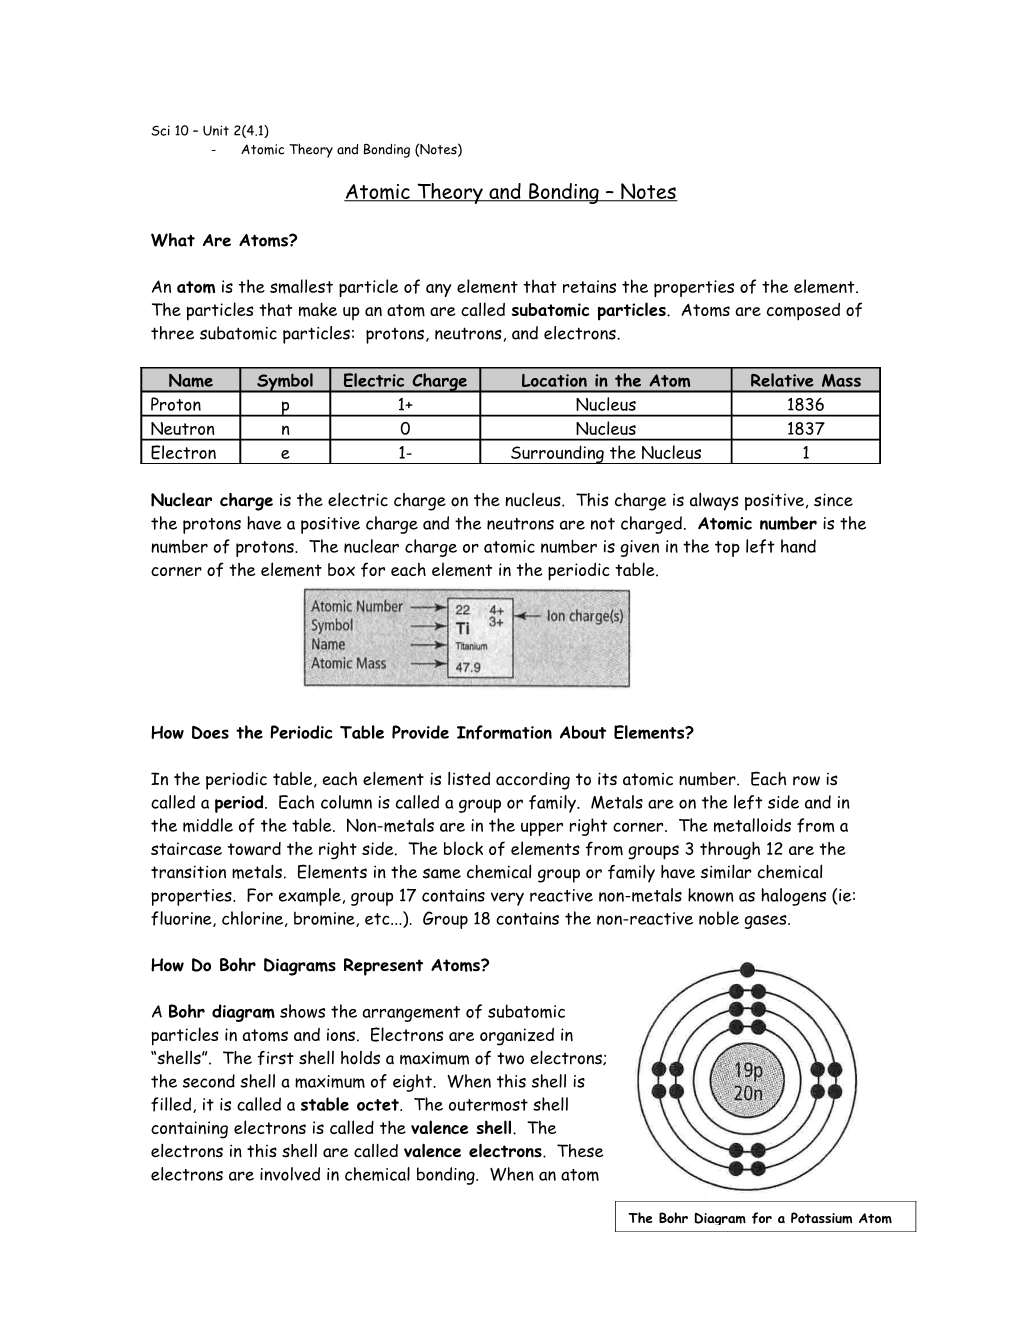 Atomic Theory and Bonding (Notes)